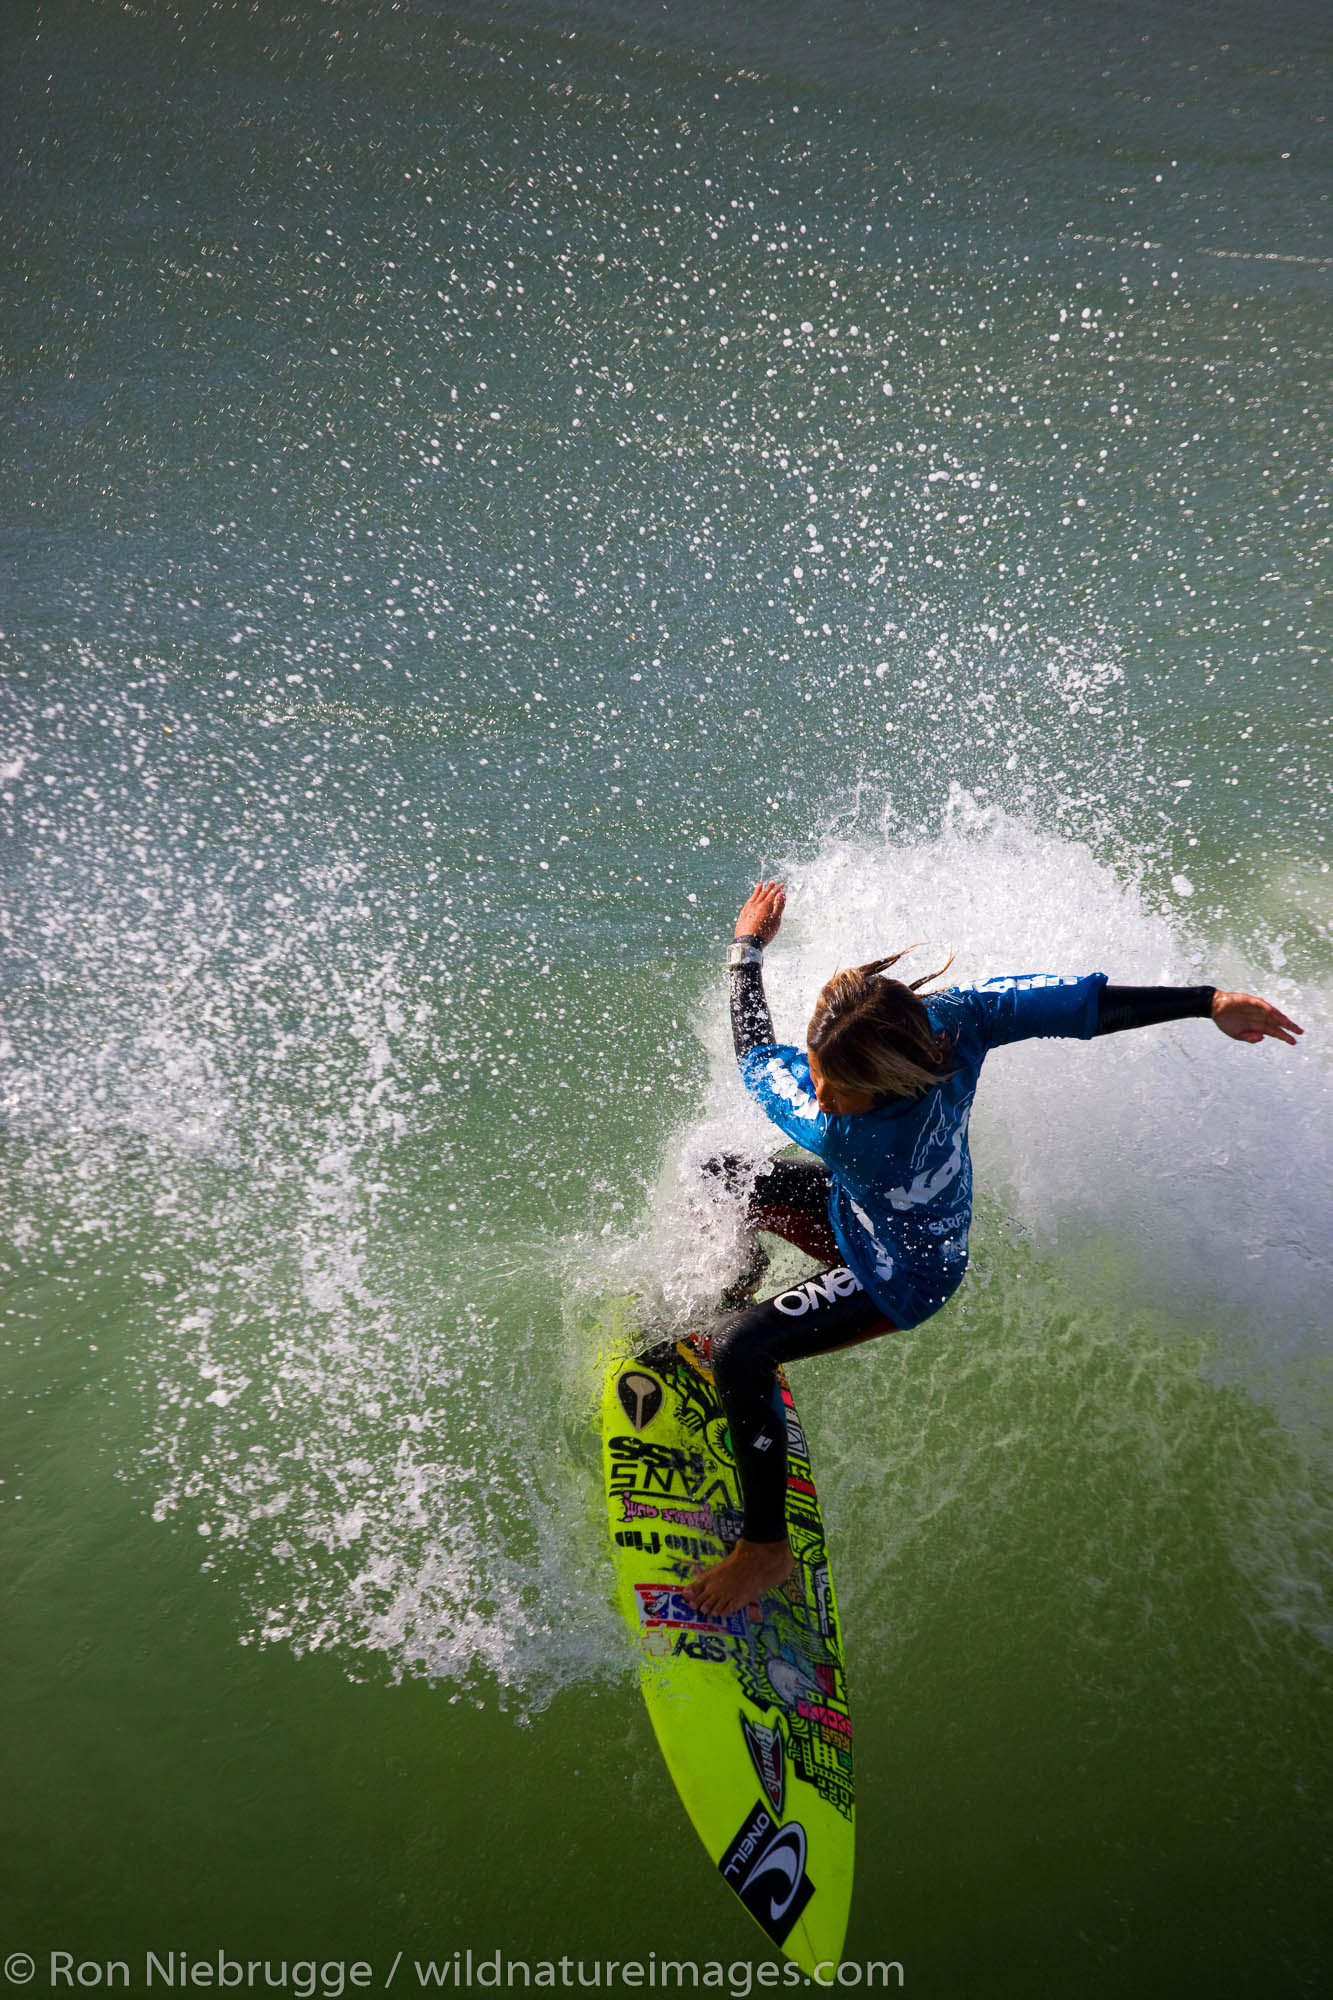 Kanoa Igarashi competing in the Katin Pro/Am surf competition at Huntington Beach Pier, Orange County, California.